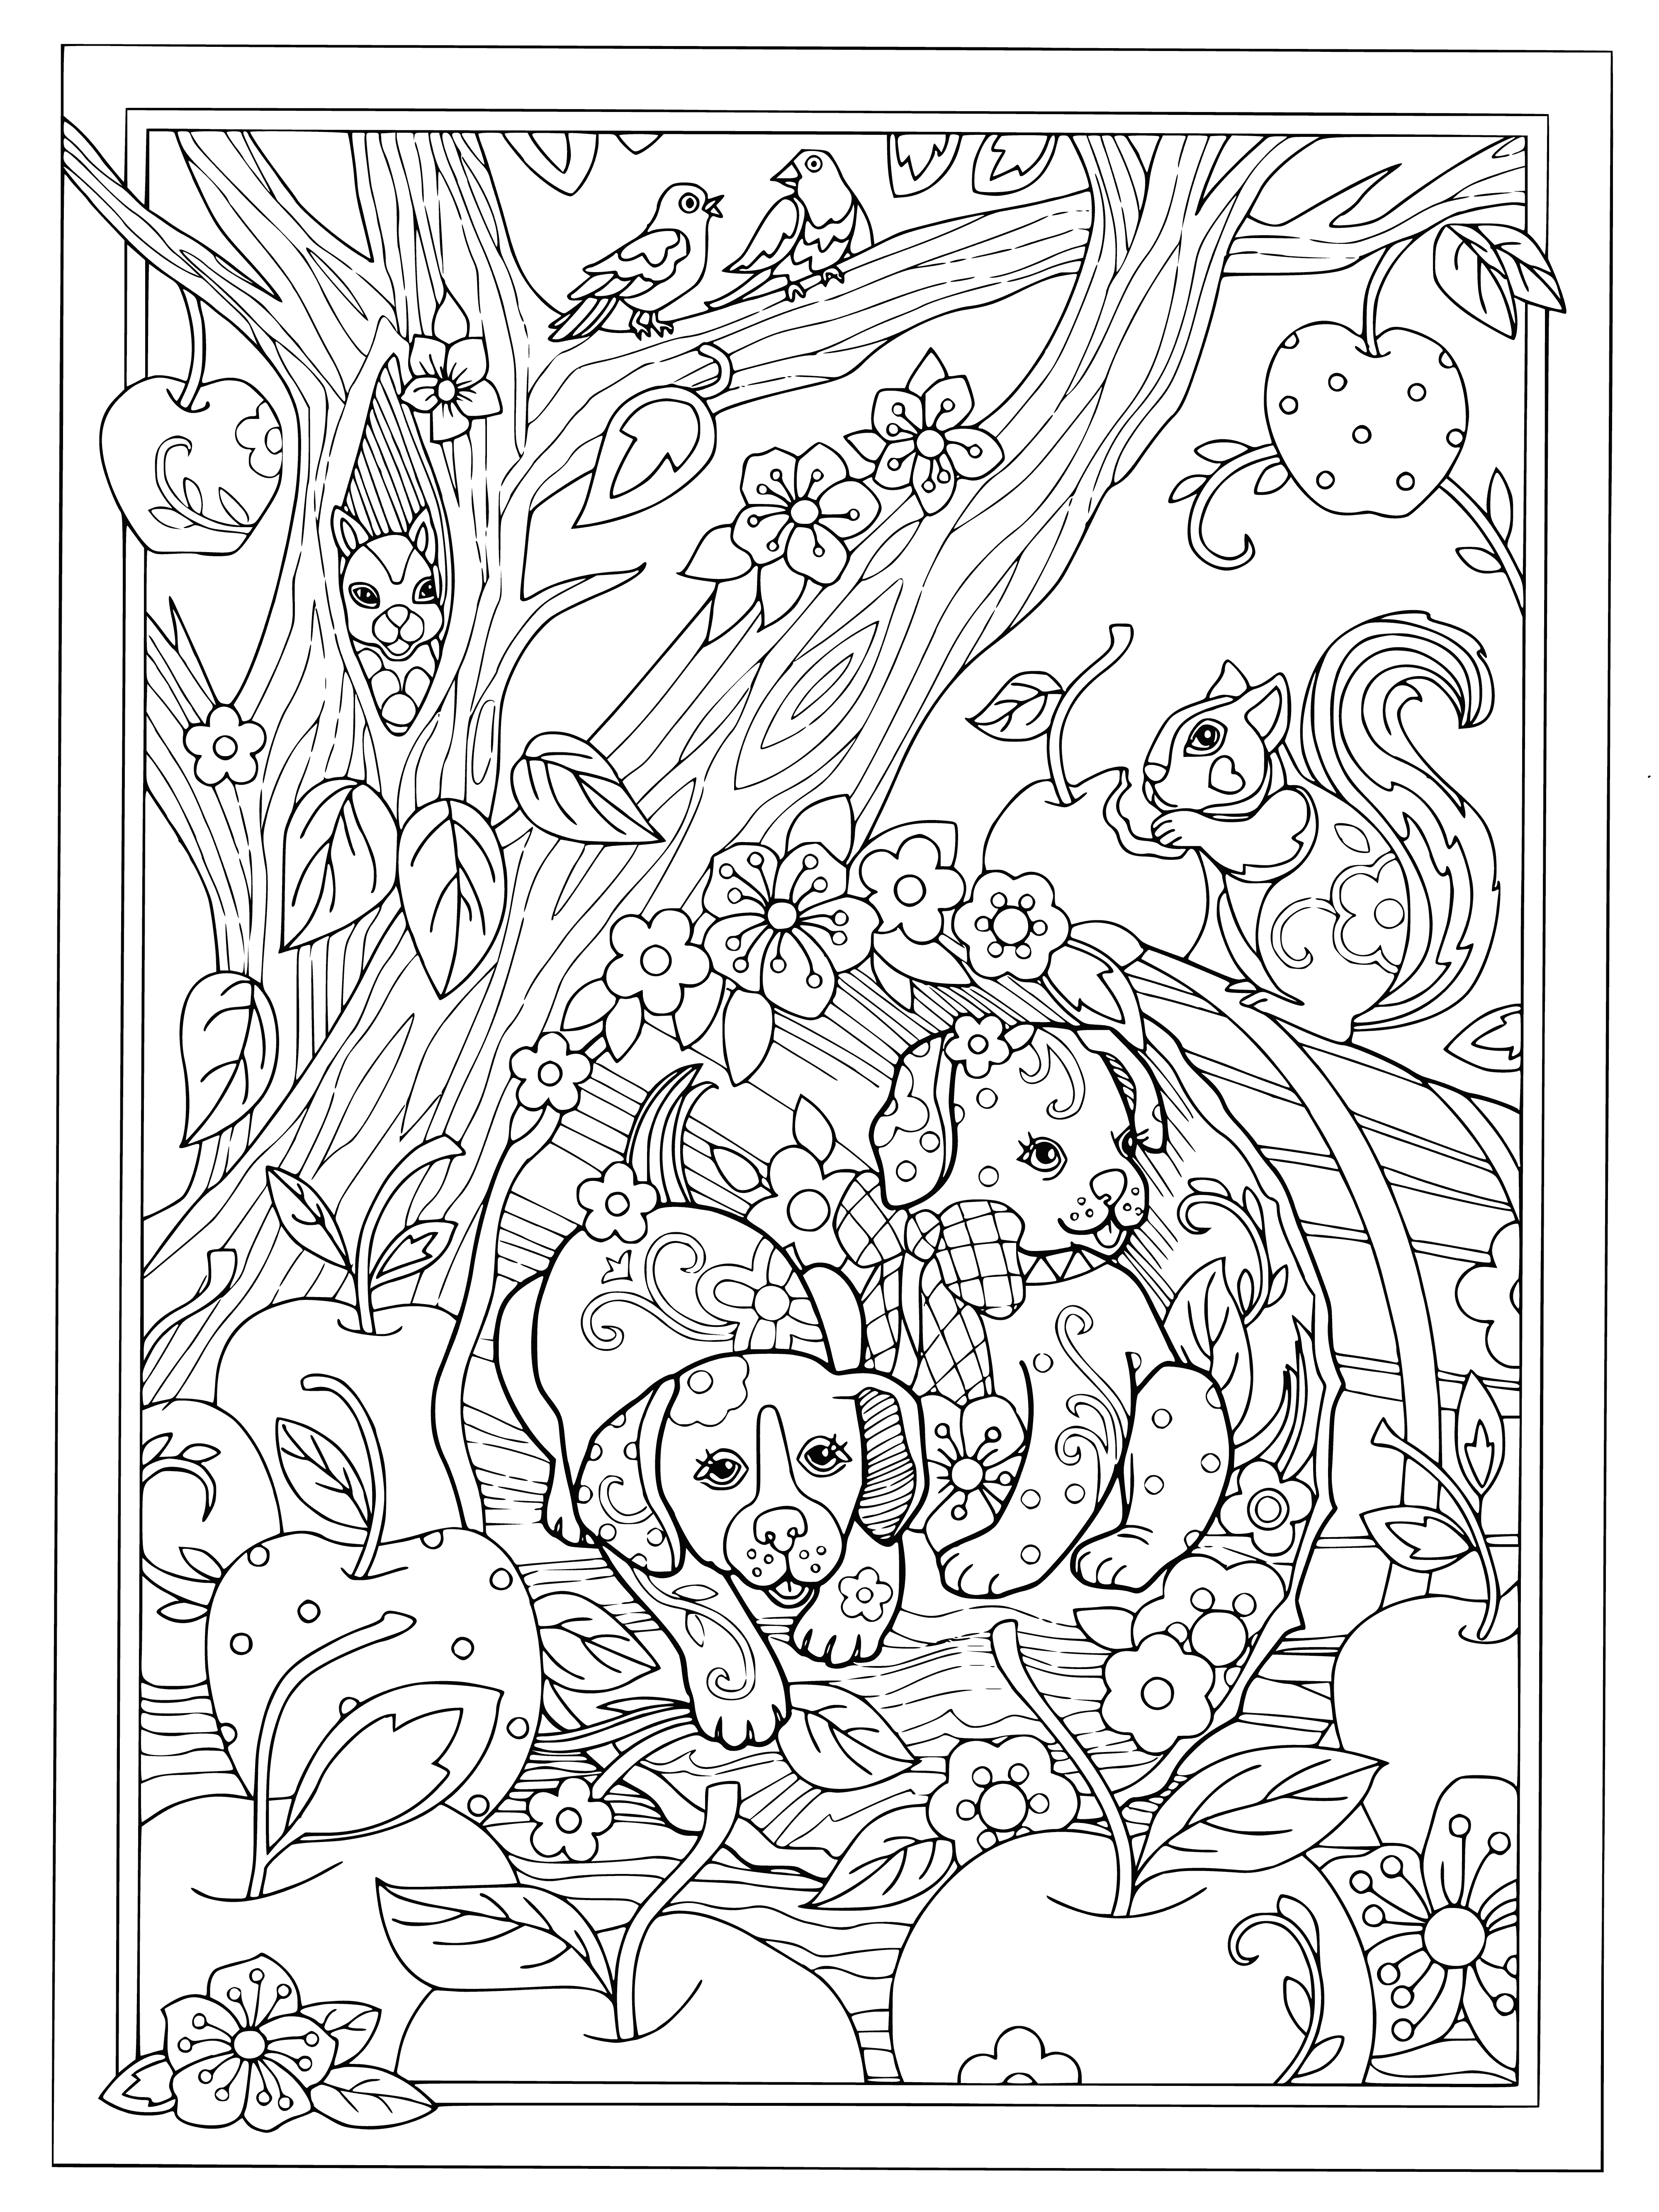 coloring page: Puppies in different activities & environments, some taking a nap, others playing, one in bath & one eating.